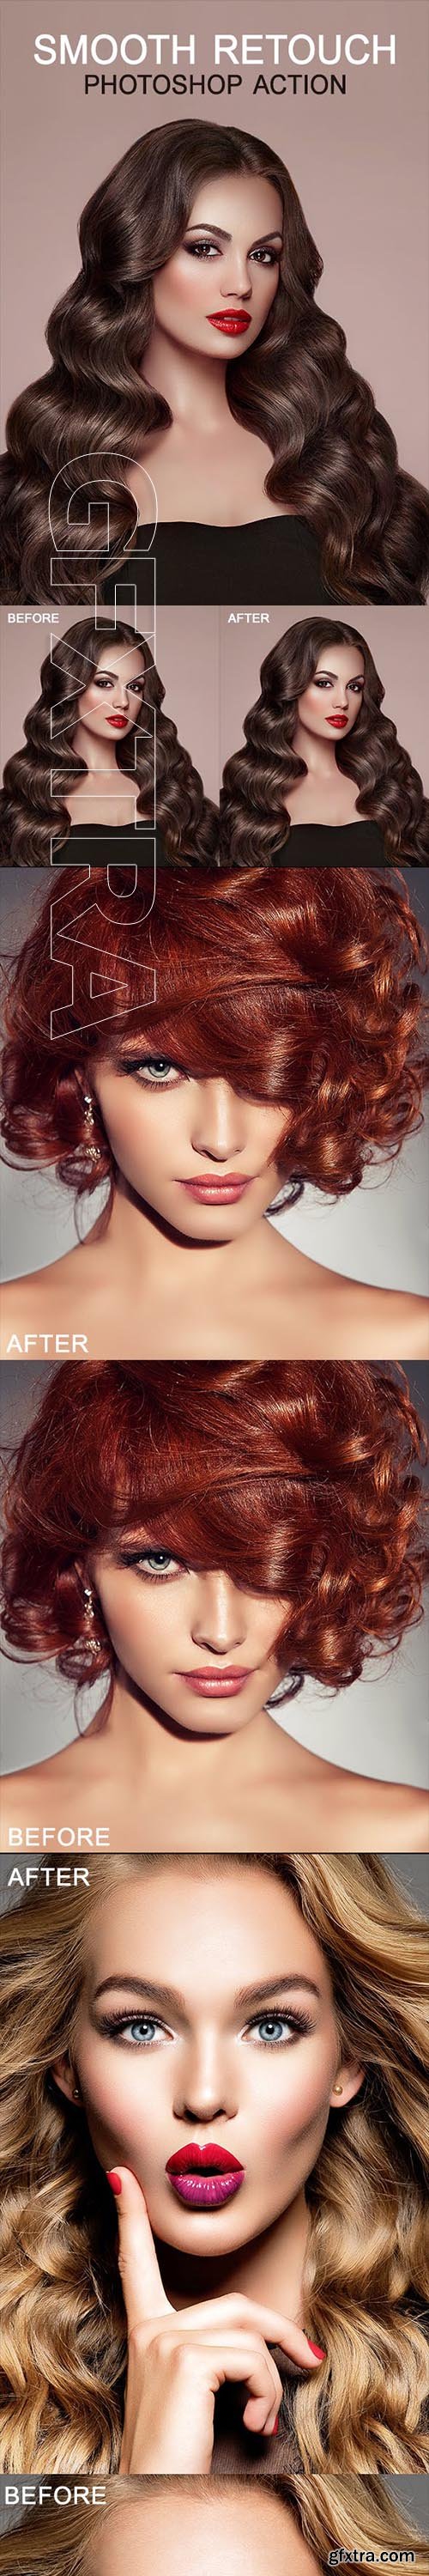 GraphicRiver - SMOOTH RETOUCH Photoshop Action 23019627